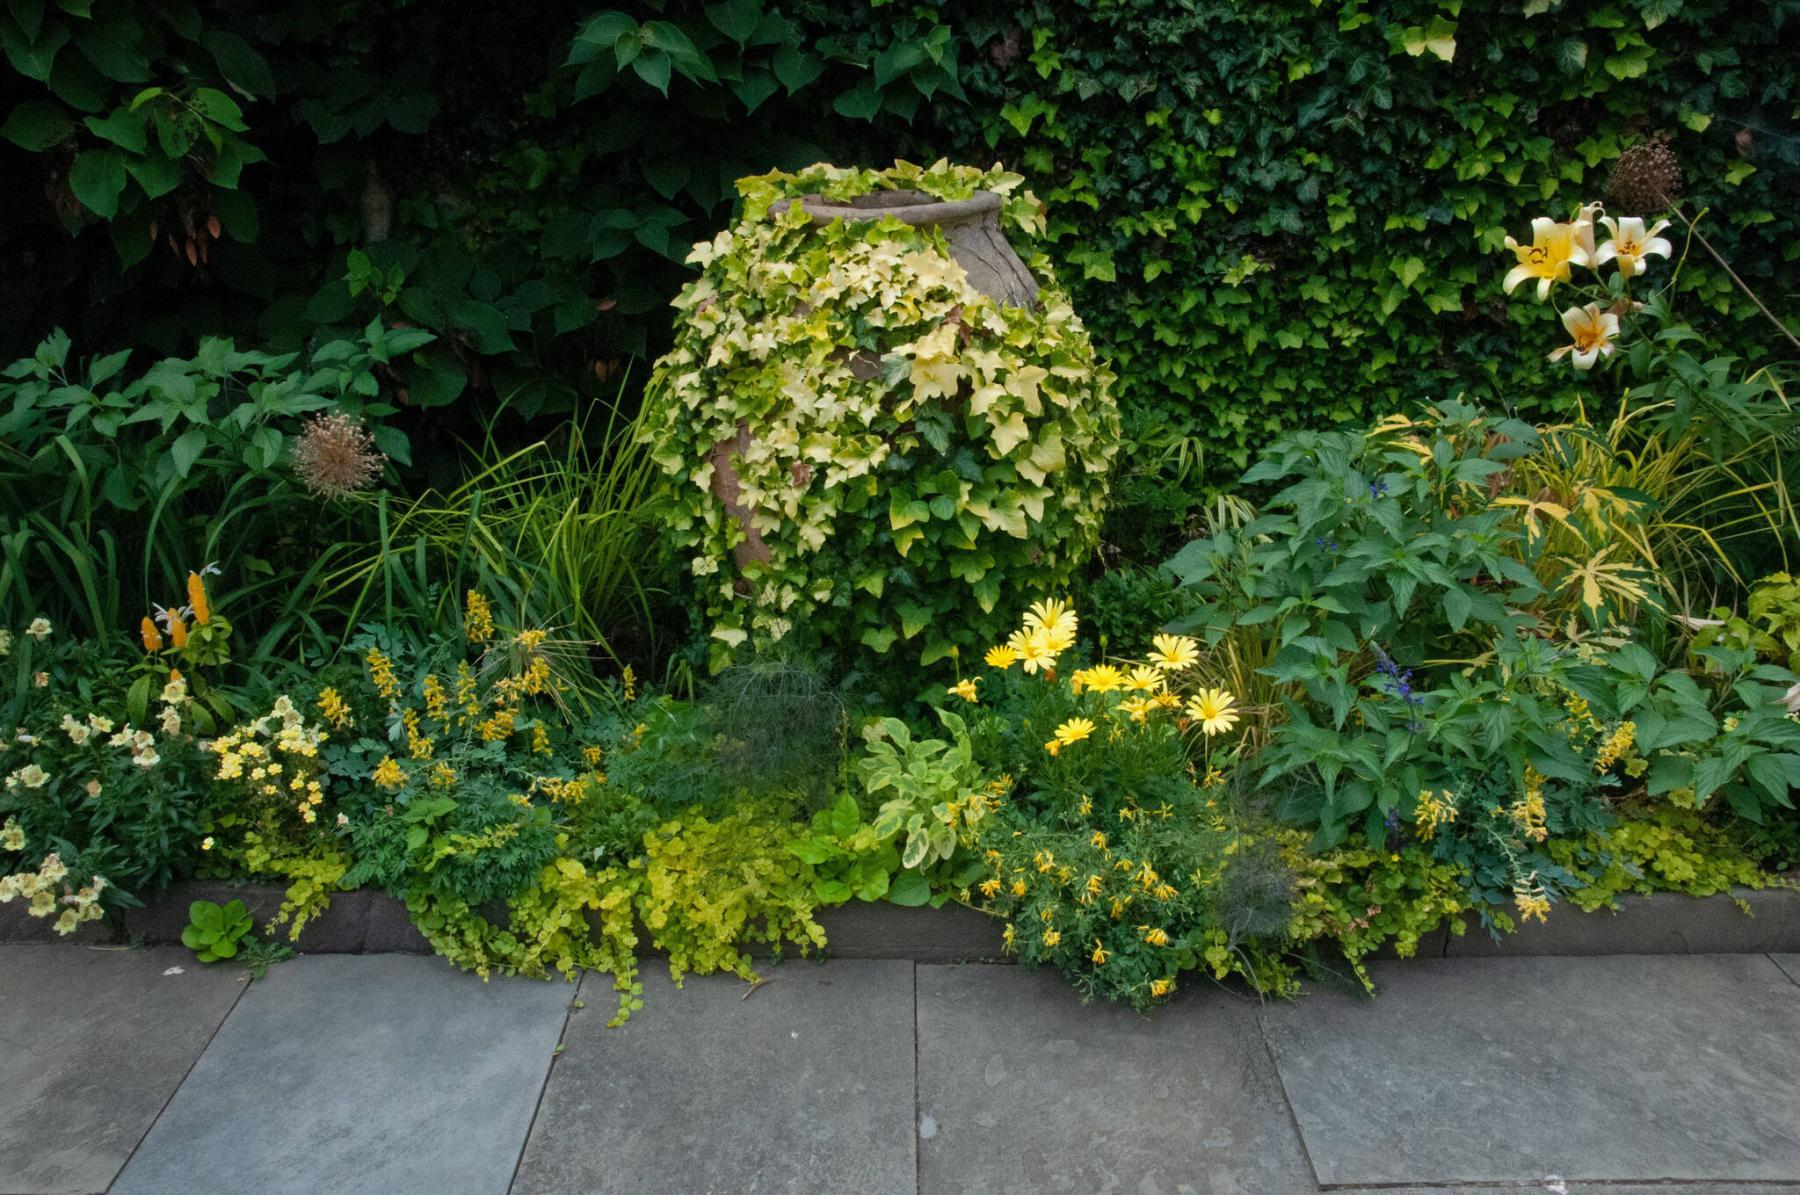  <p>The gold foliage of English Ivy spreads across an empty urn and is complemented by ground covers with yellow tints.</p>
                                <p>Photos by Gary Lewis</p>
                                <p>A mix of hardy sedum ground covers can be used between stones and pavers or planted along sidewalks.</p> 